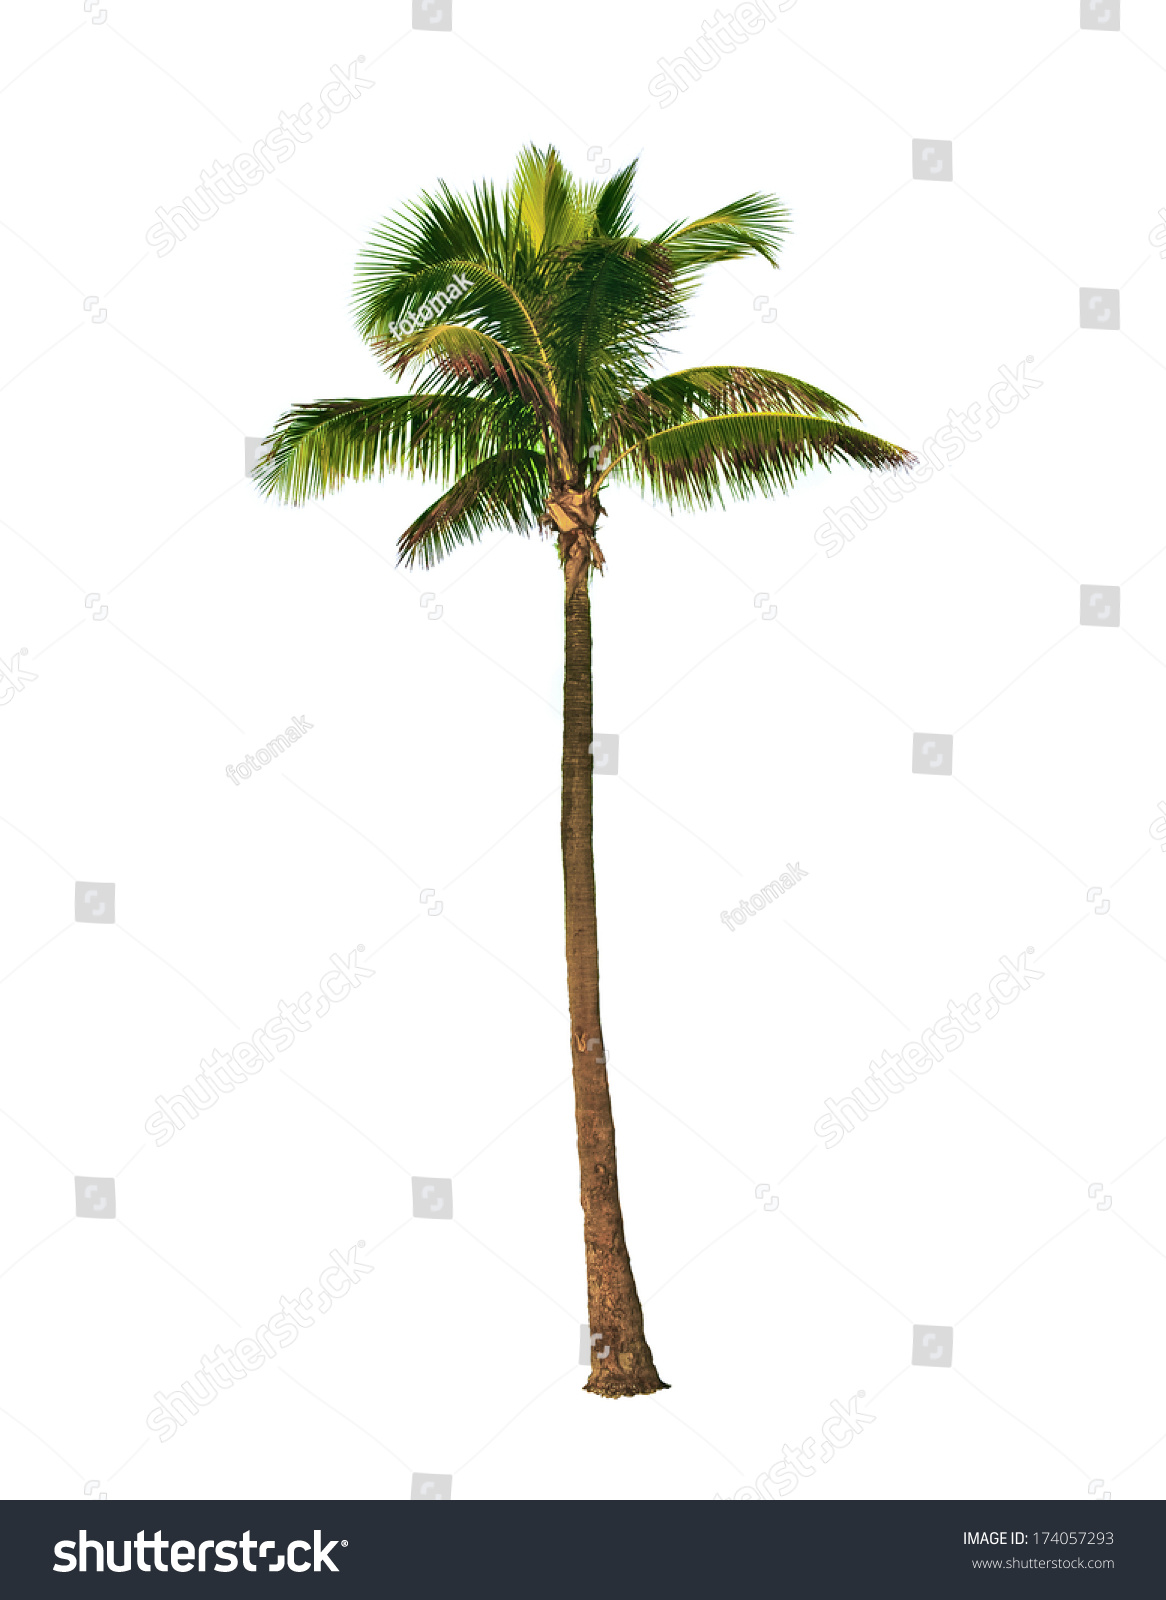 Coconut Palm Tree, Cocos Nucifera, With Green Leaves Isolated On White ...